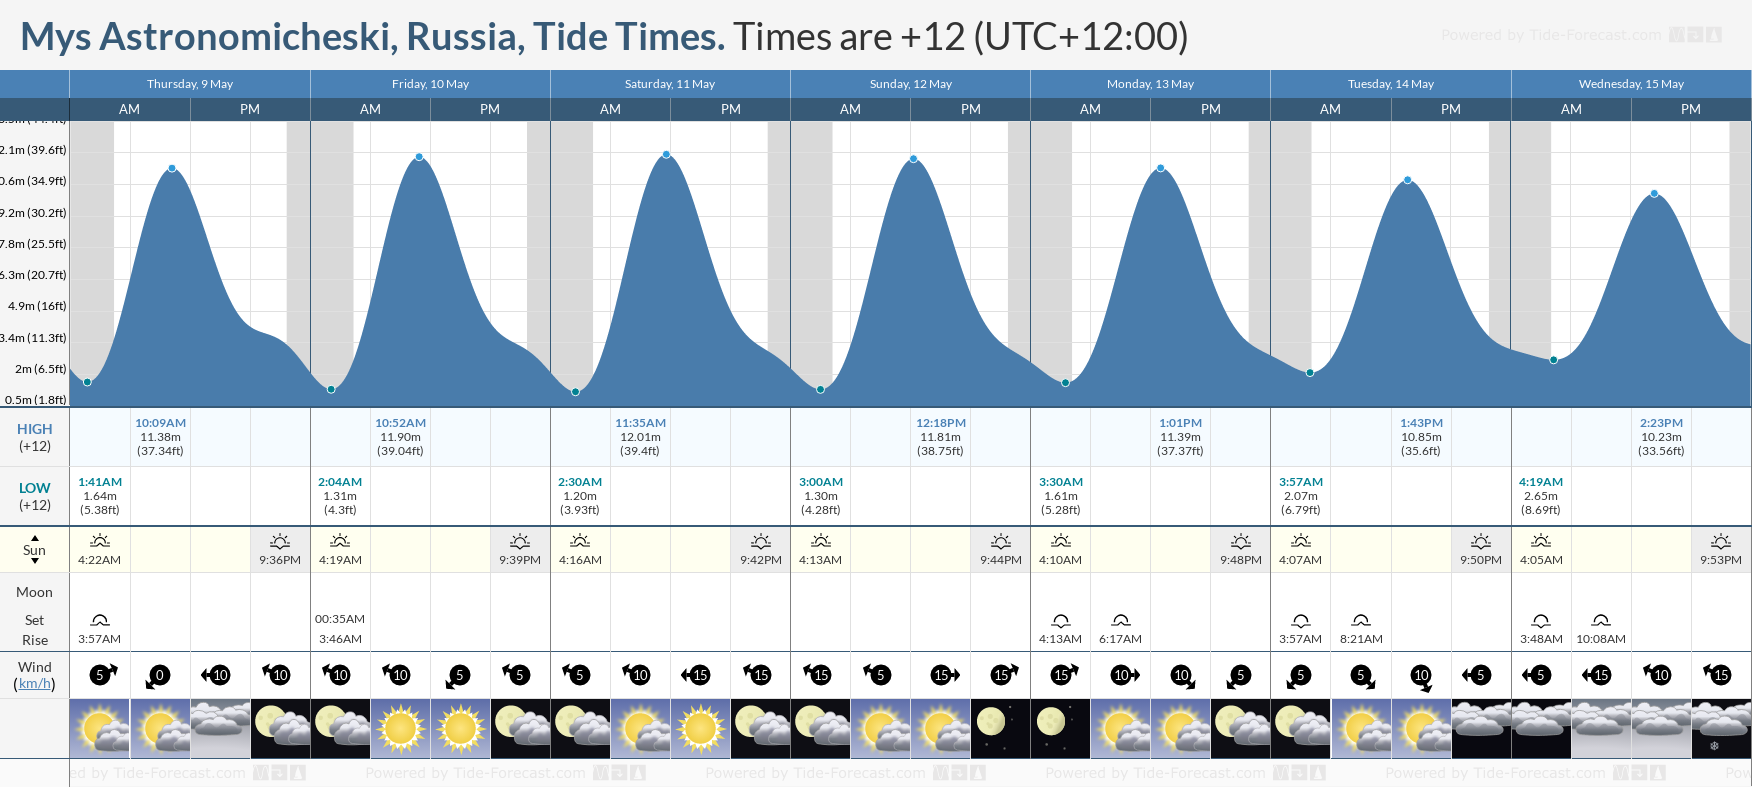 Mys Astronomicheski, Russia Tide Chart including high and low tide tide times for the next 7 days